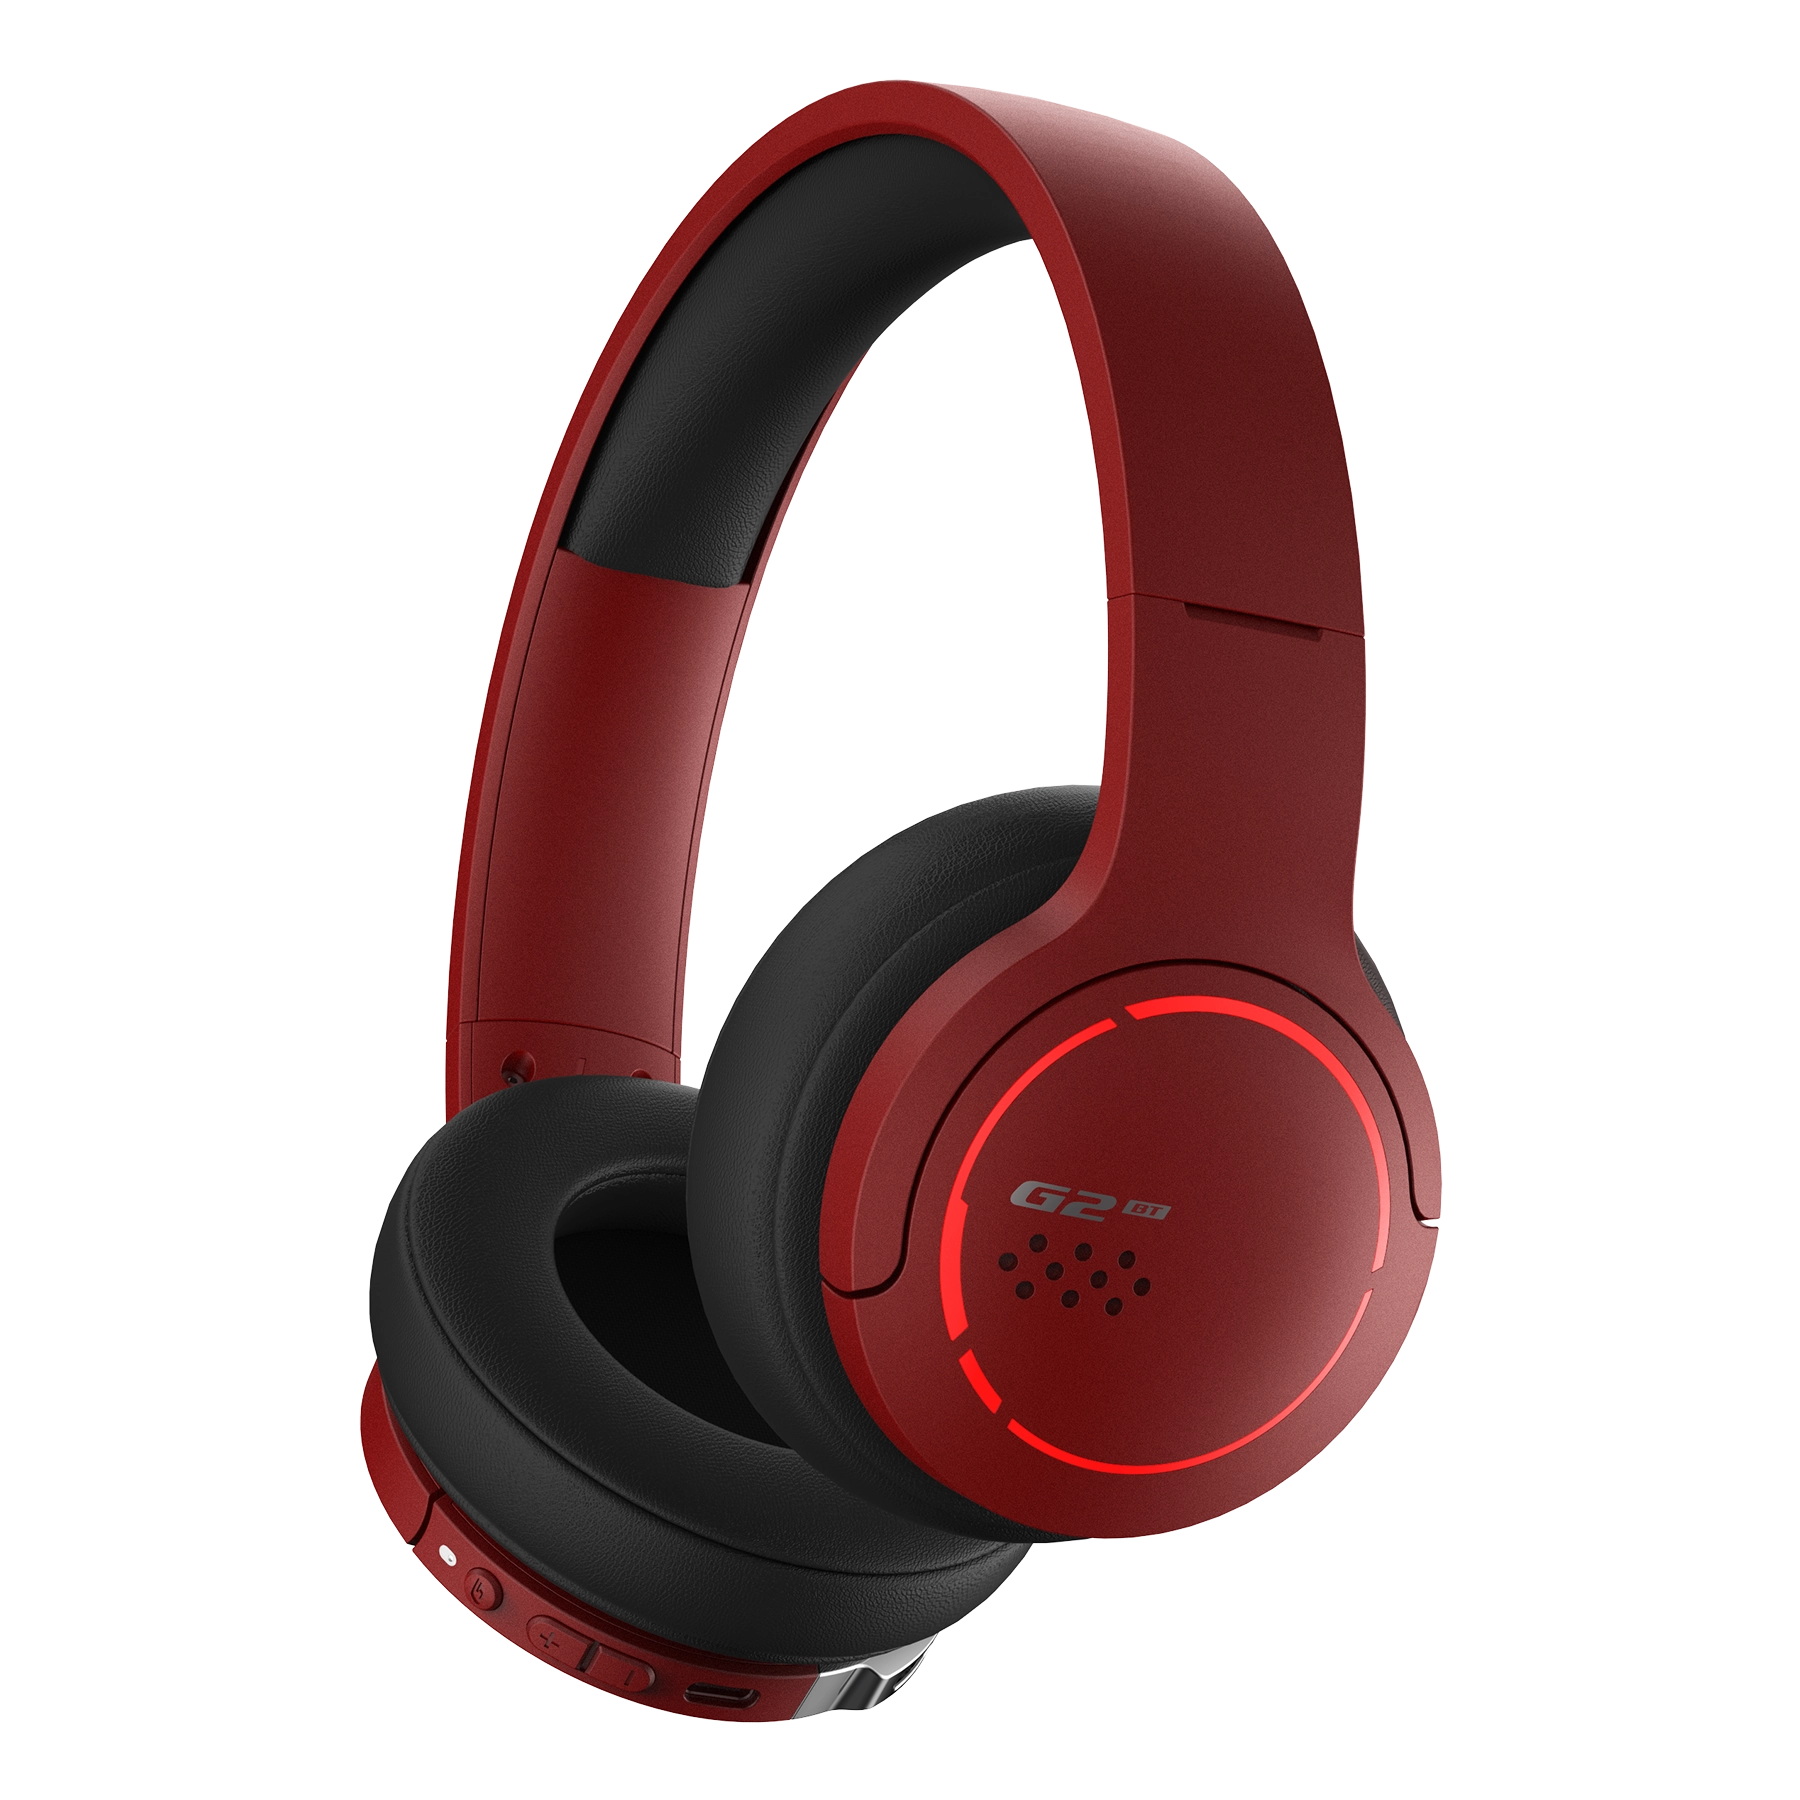 G2BT Headset Product pictures red_